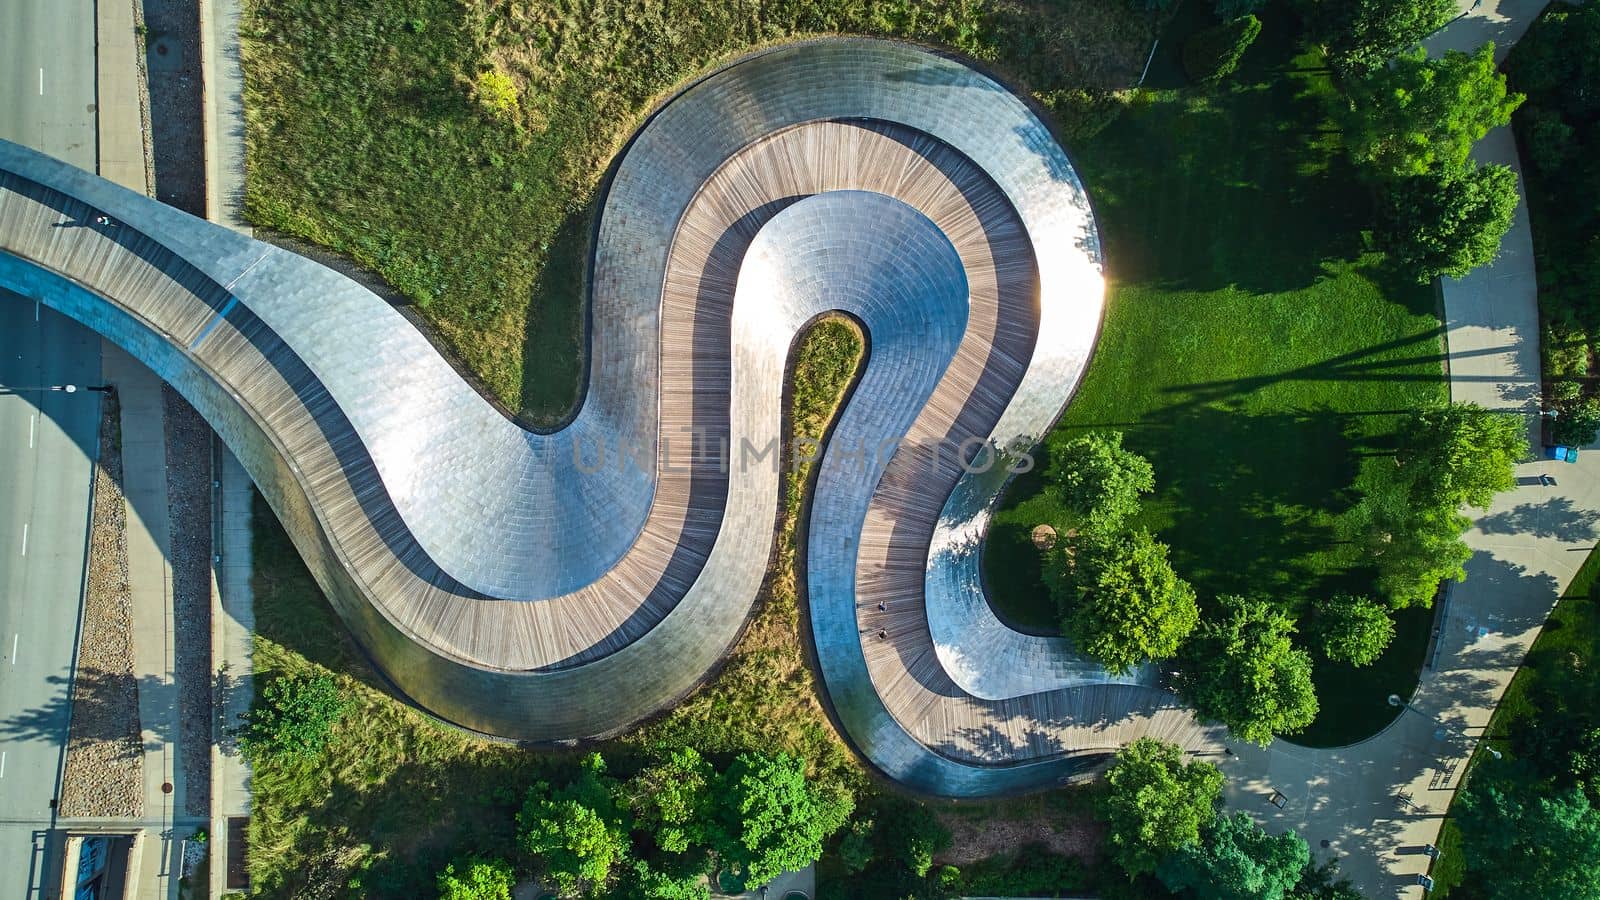 Image of Wavy snake metal path of Pedestrian bridge from above at Millennium Park in Chicago